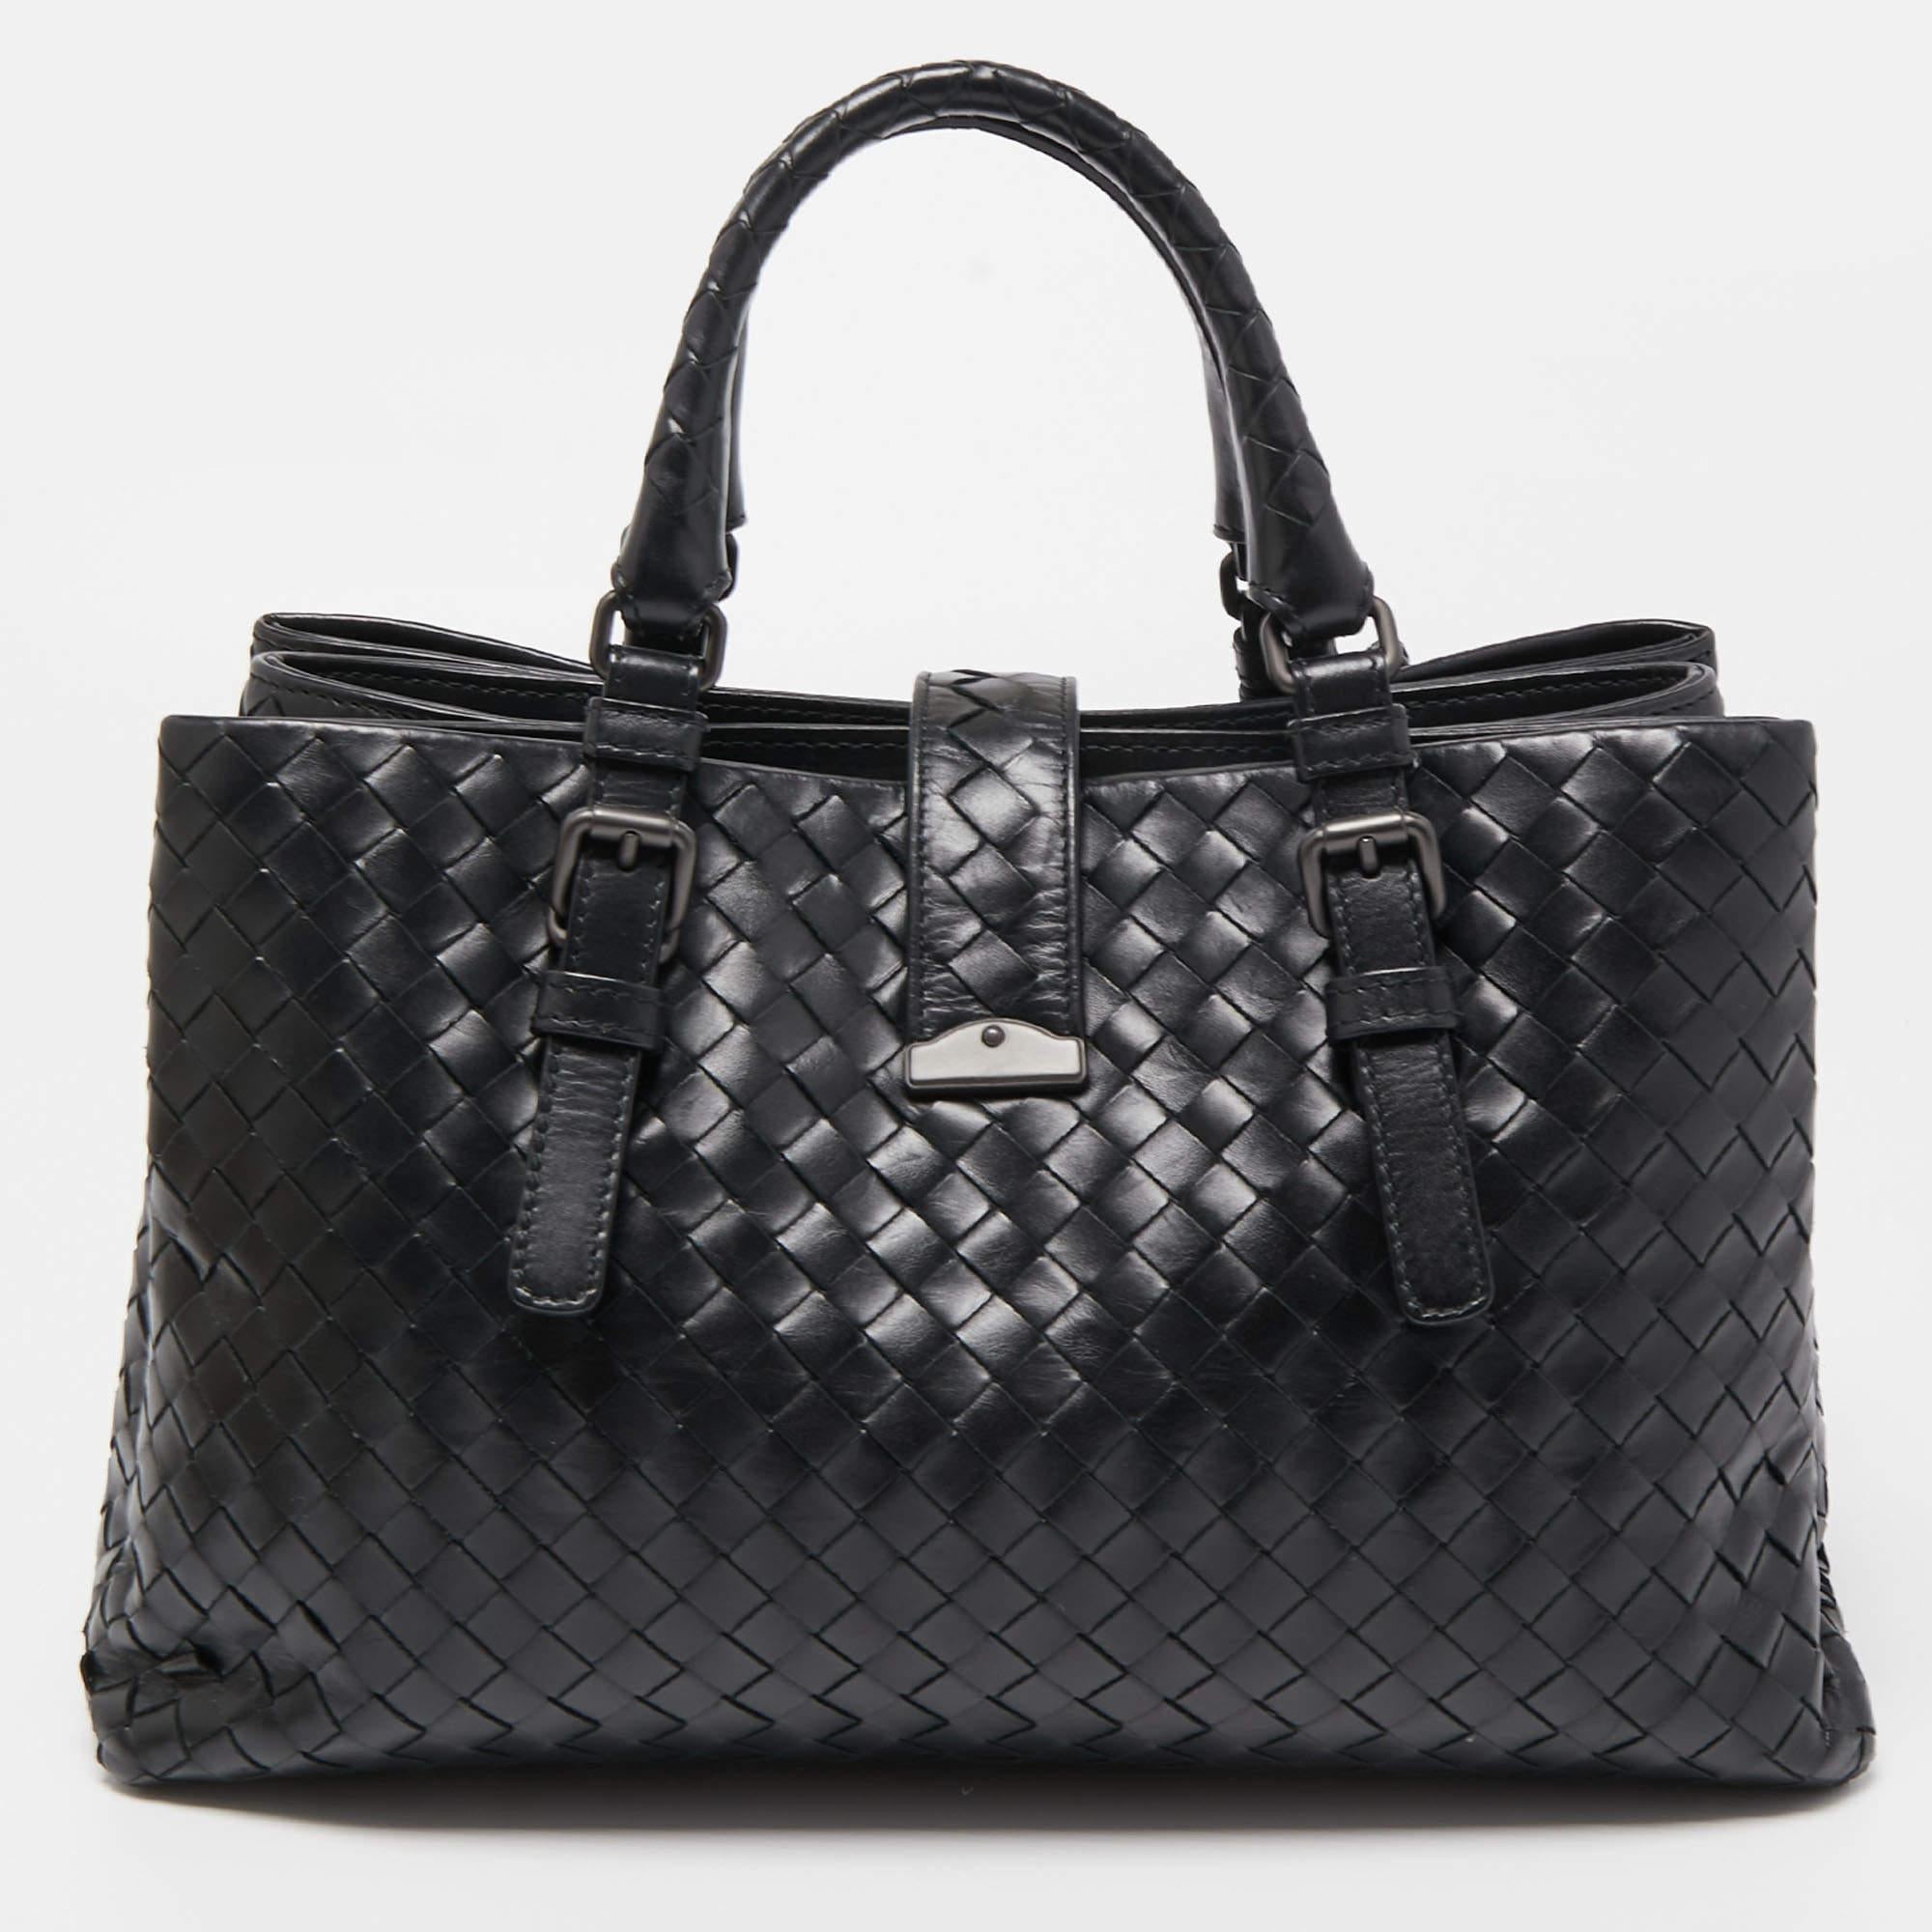 Carry everything you need in style thanks to this Bottega Veneta Intrecciato Roma tote. Crafted from the best materials, this is an accessory that promises enduring style and usage.

Includes: Original Dustbag, Detachable Strap, Key